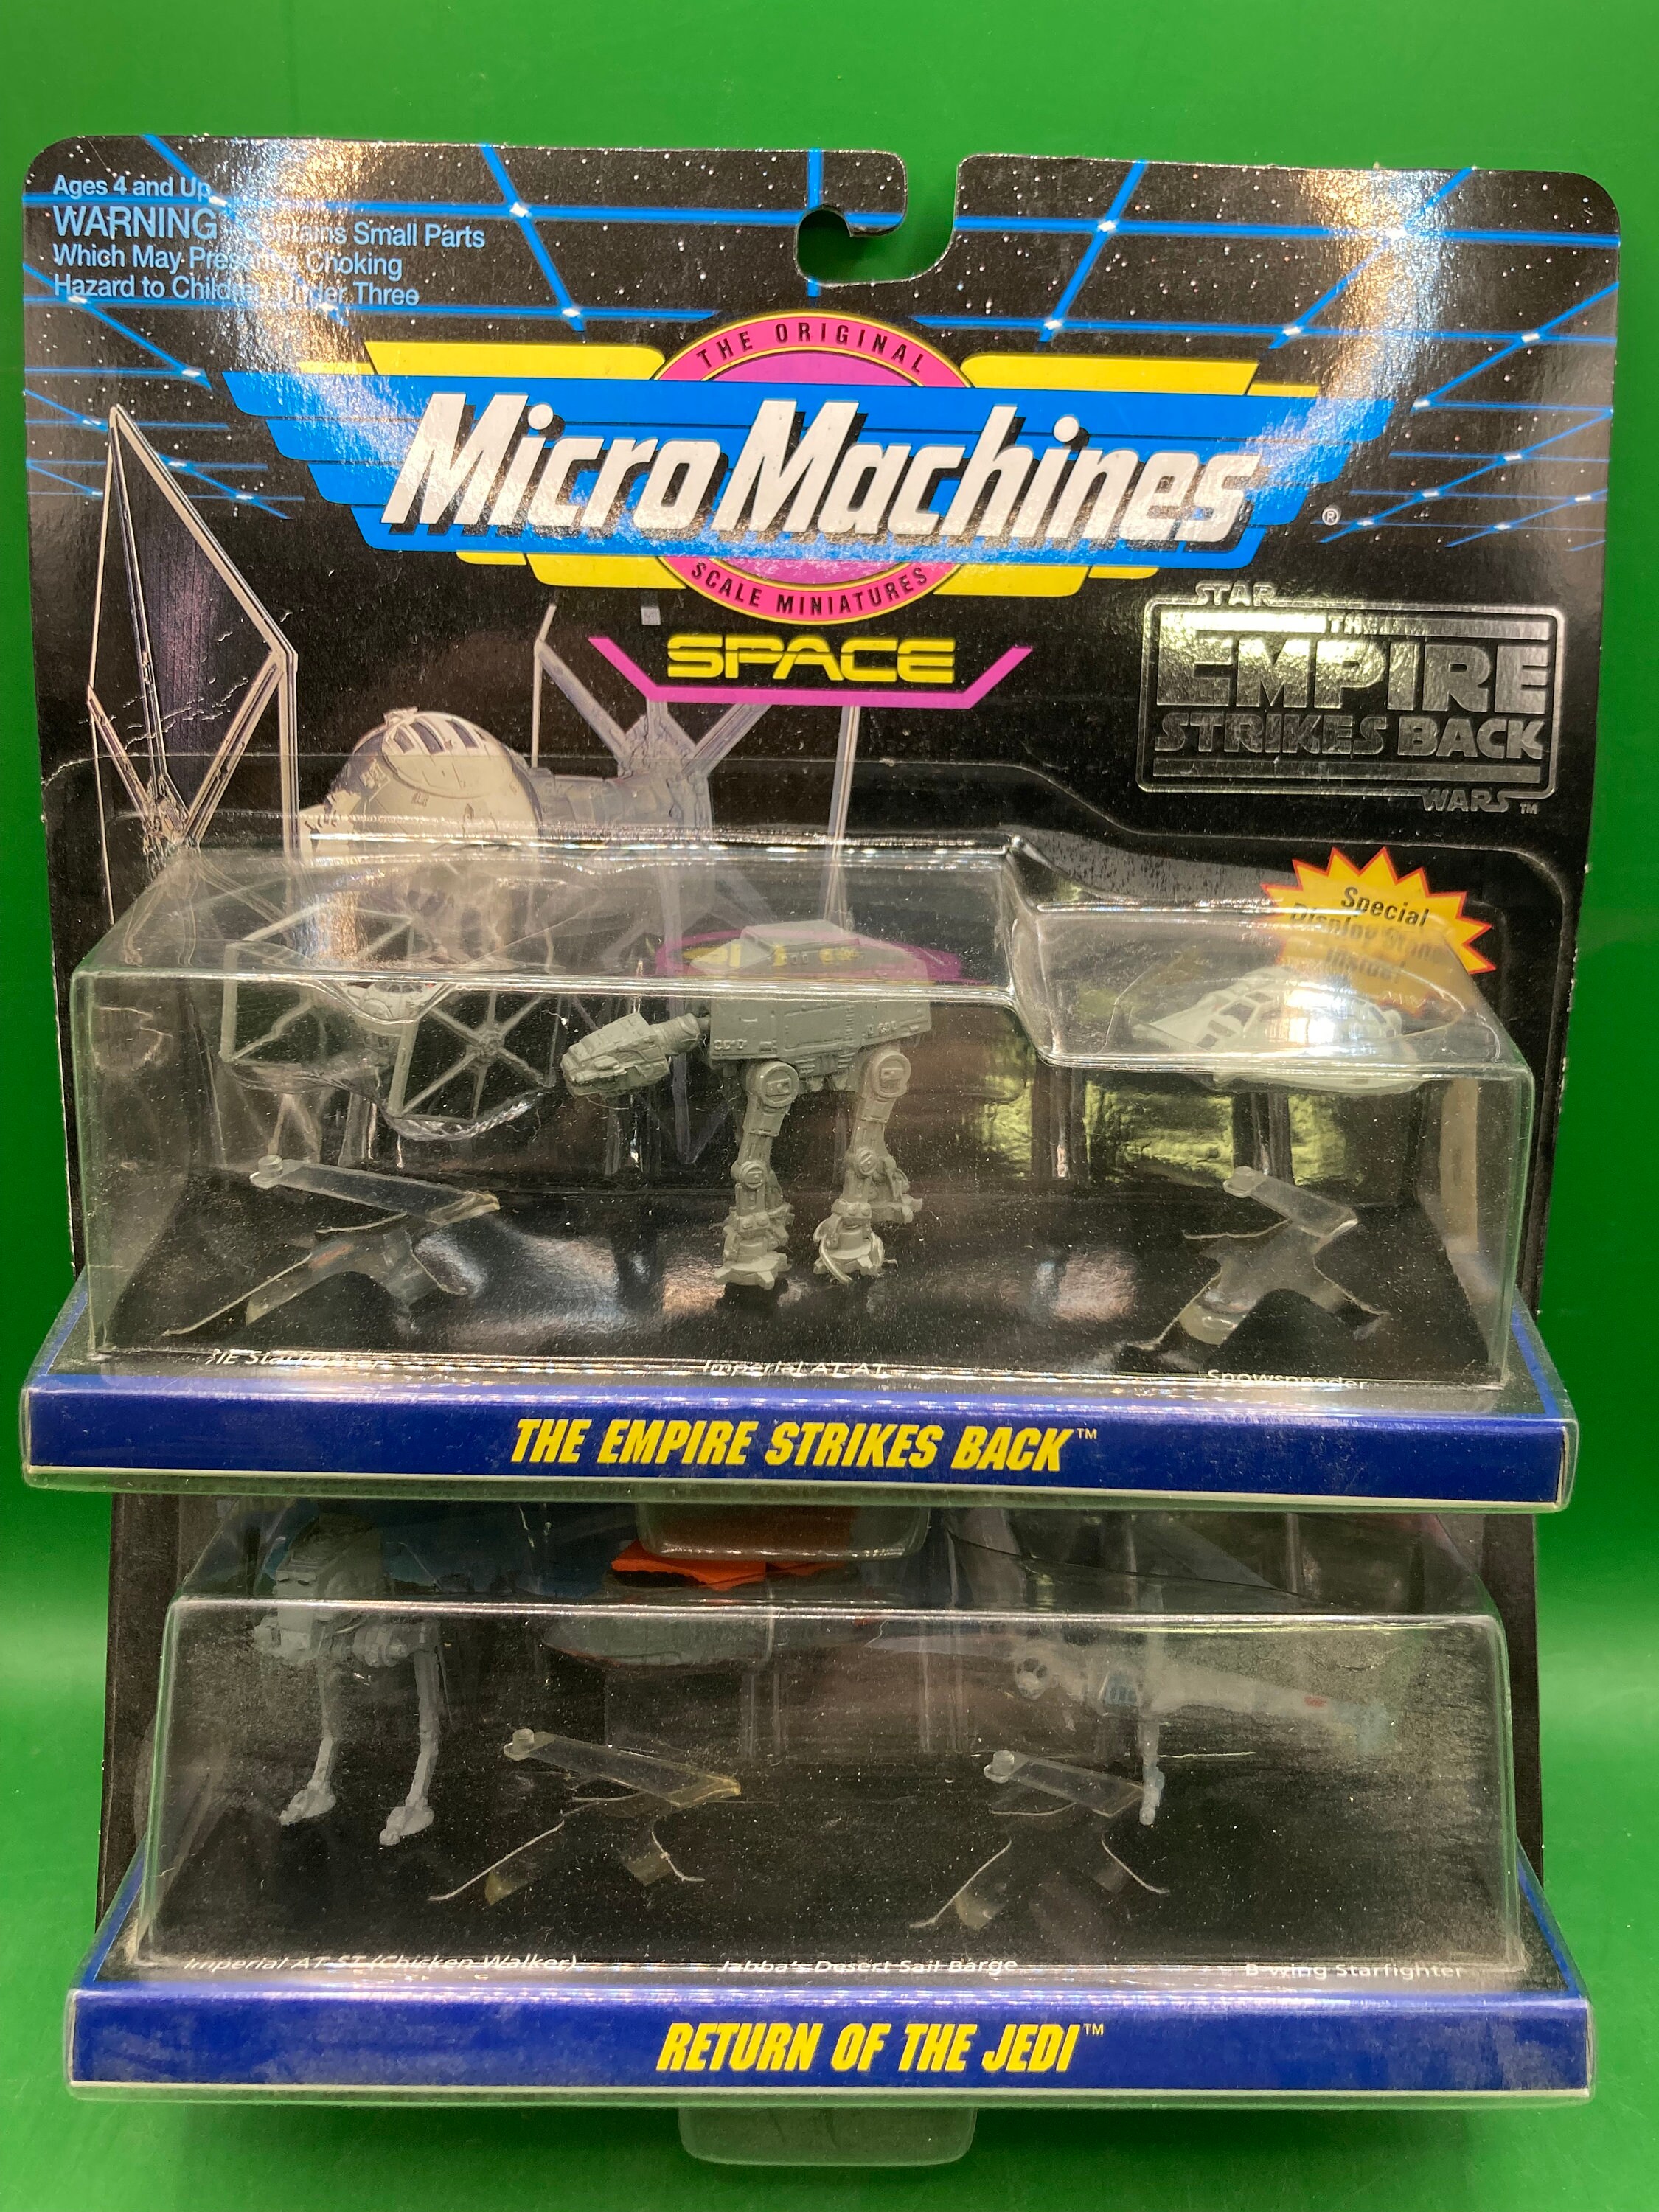 Micro Machines Are Coming Back!